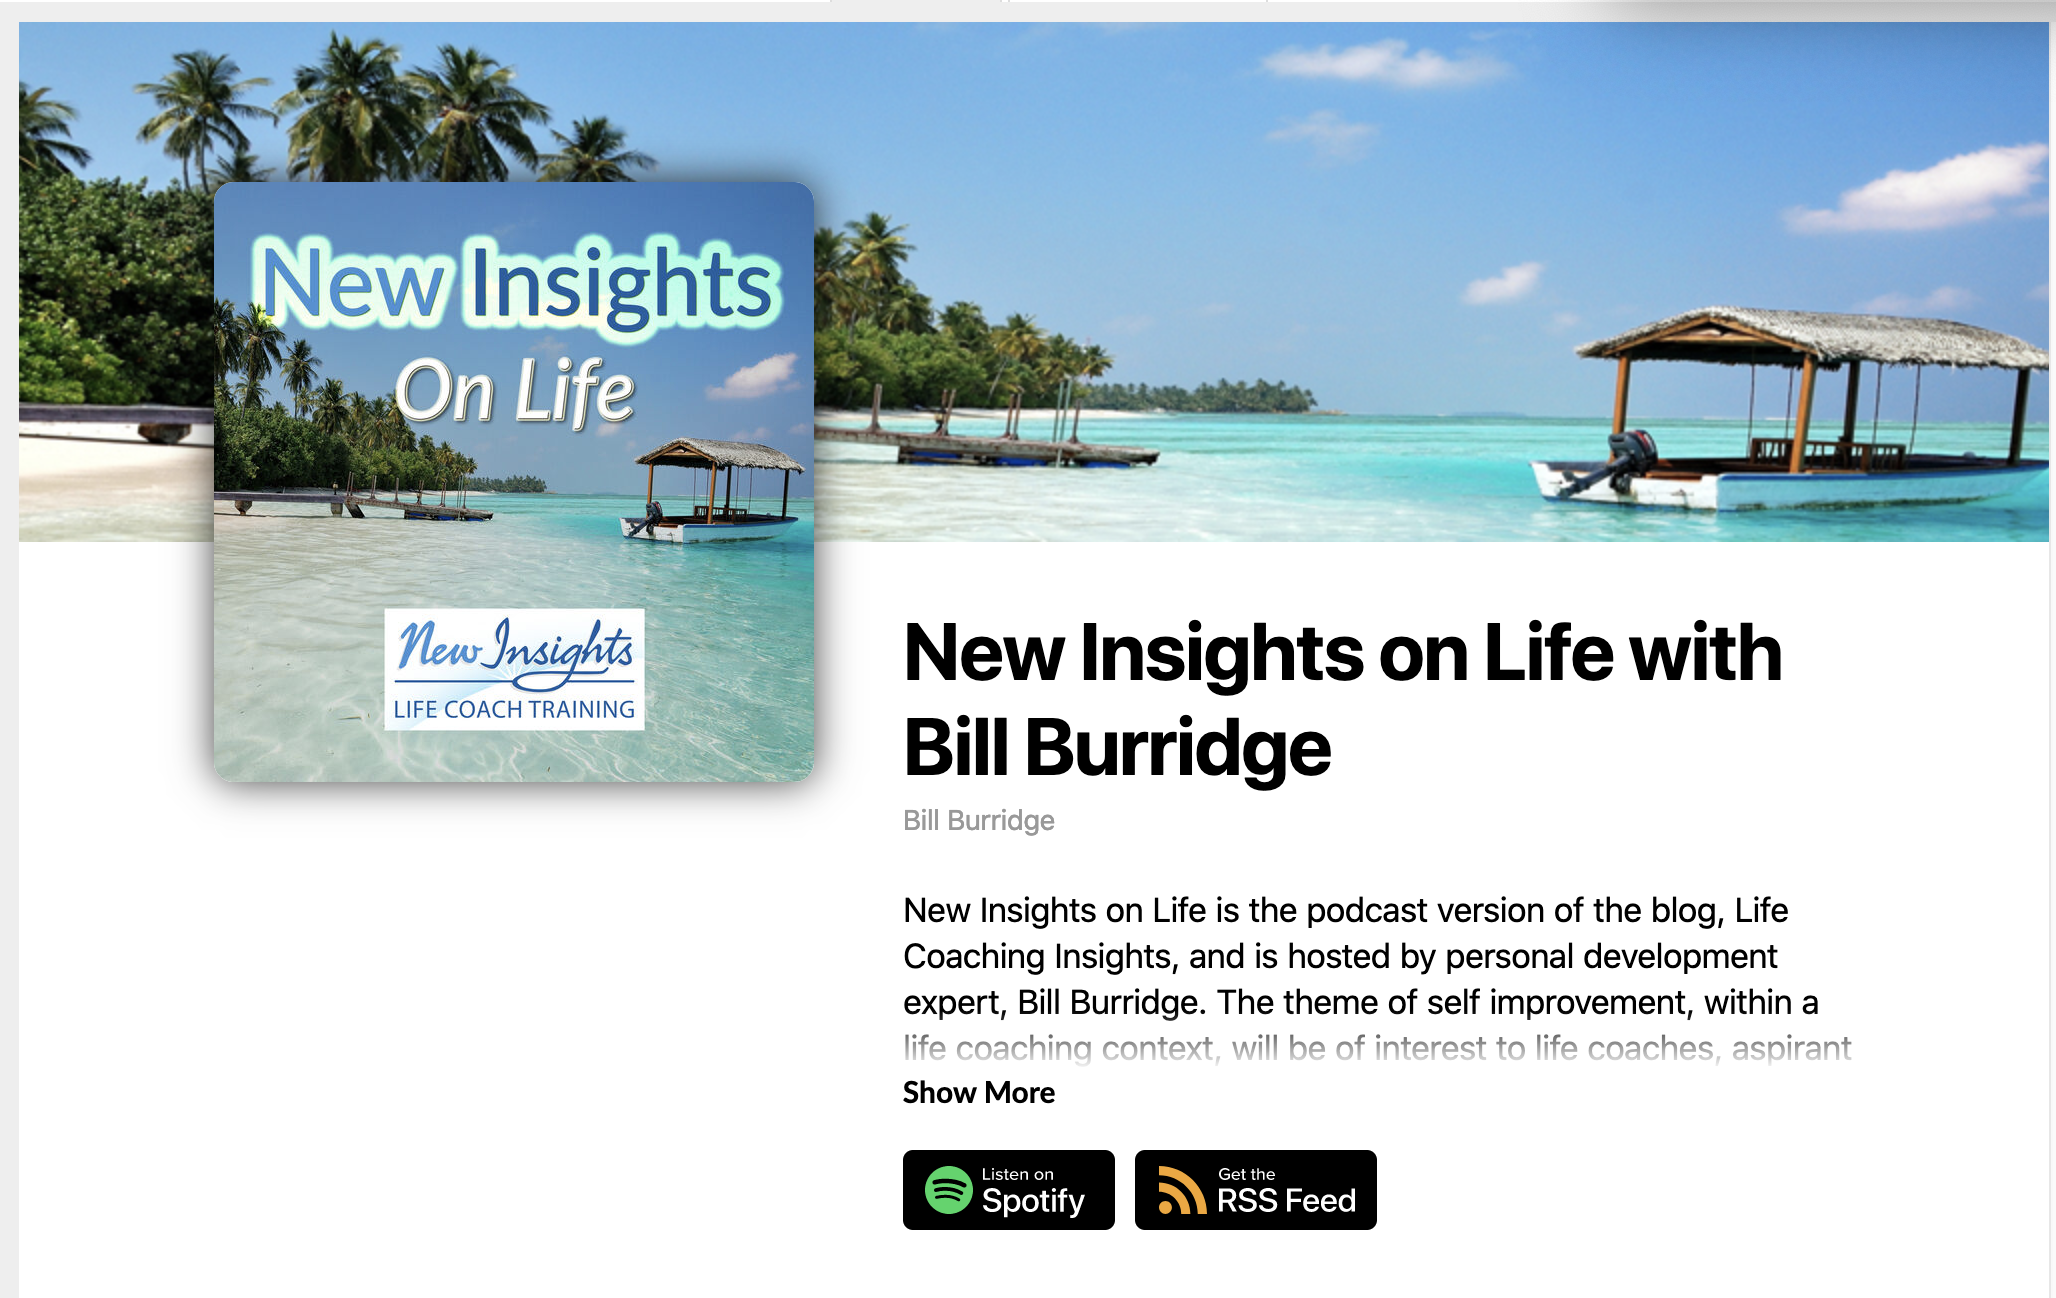 New Insights on Life podcast